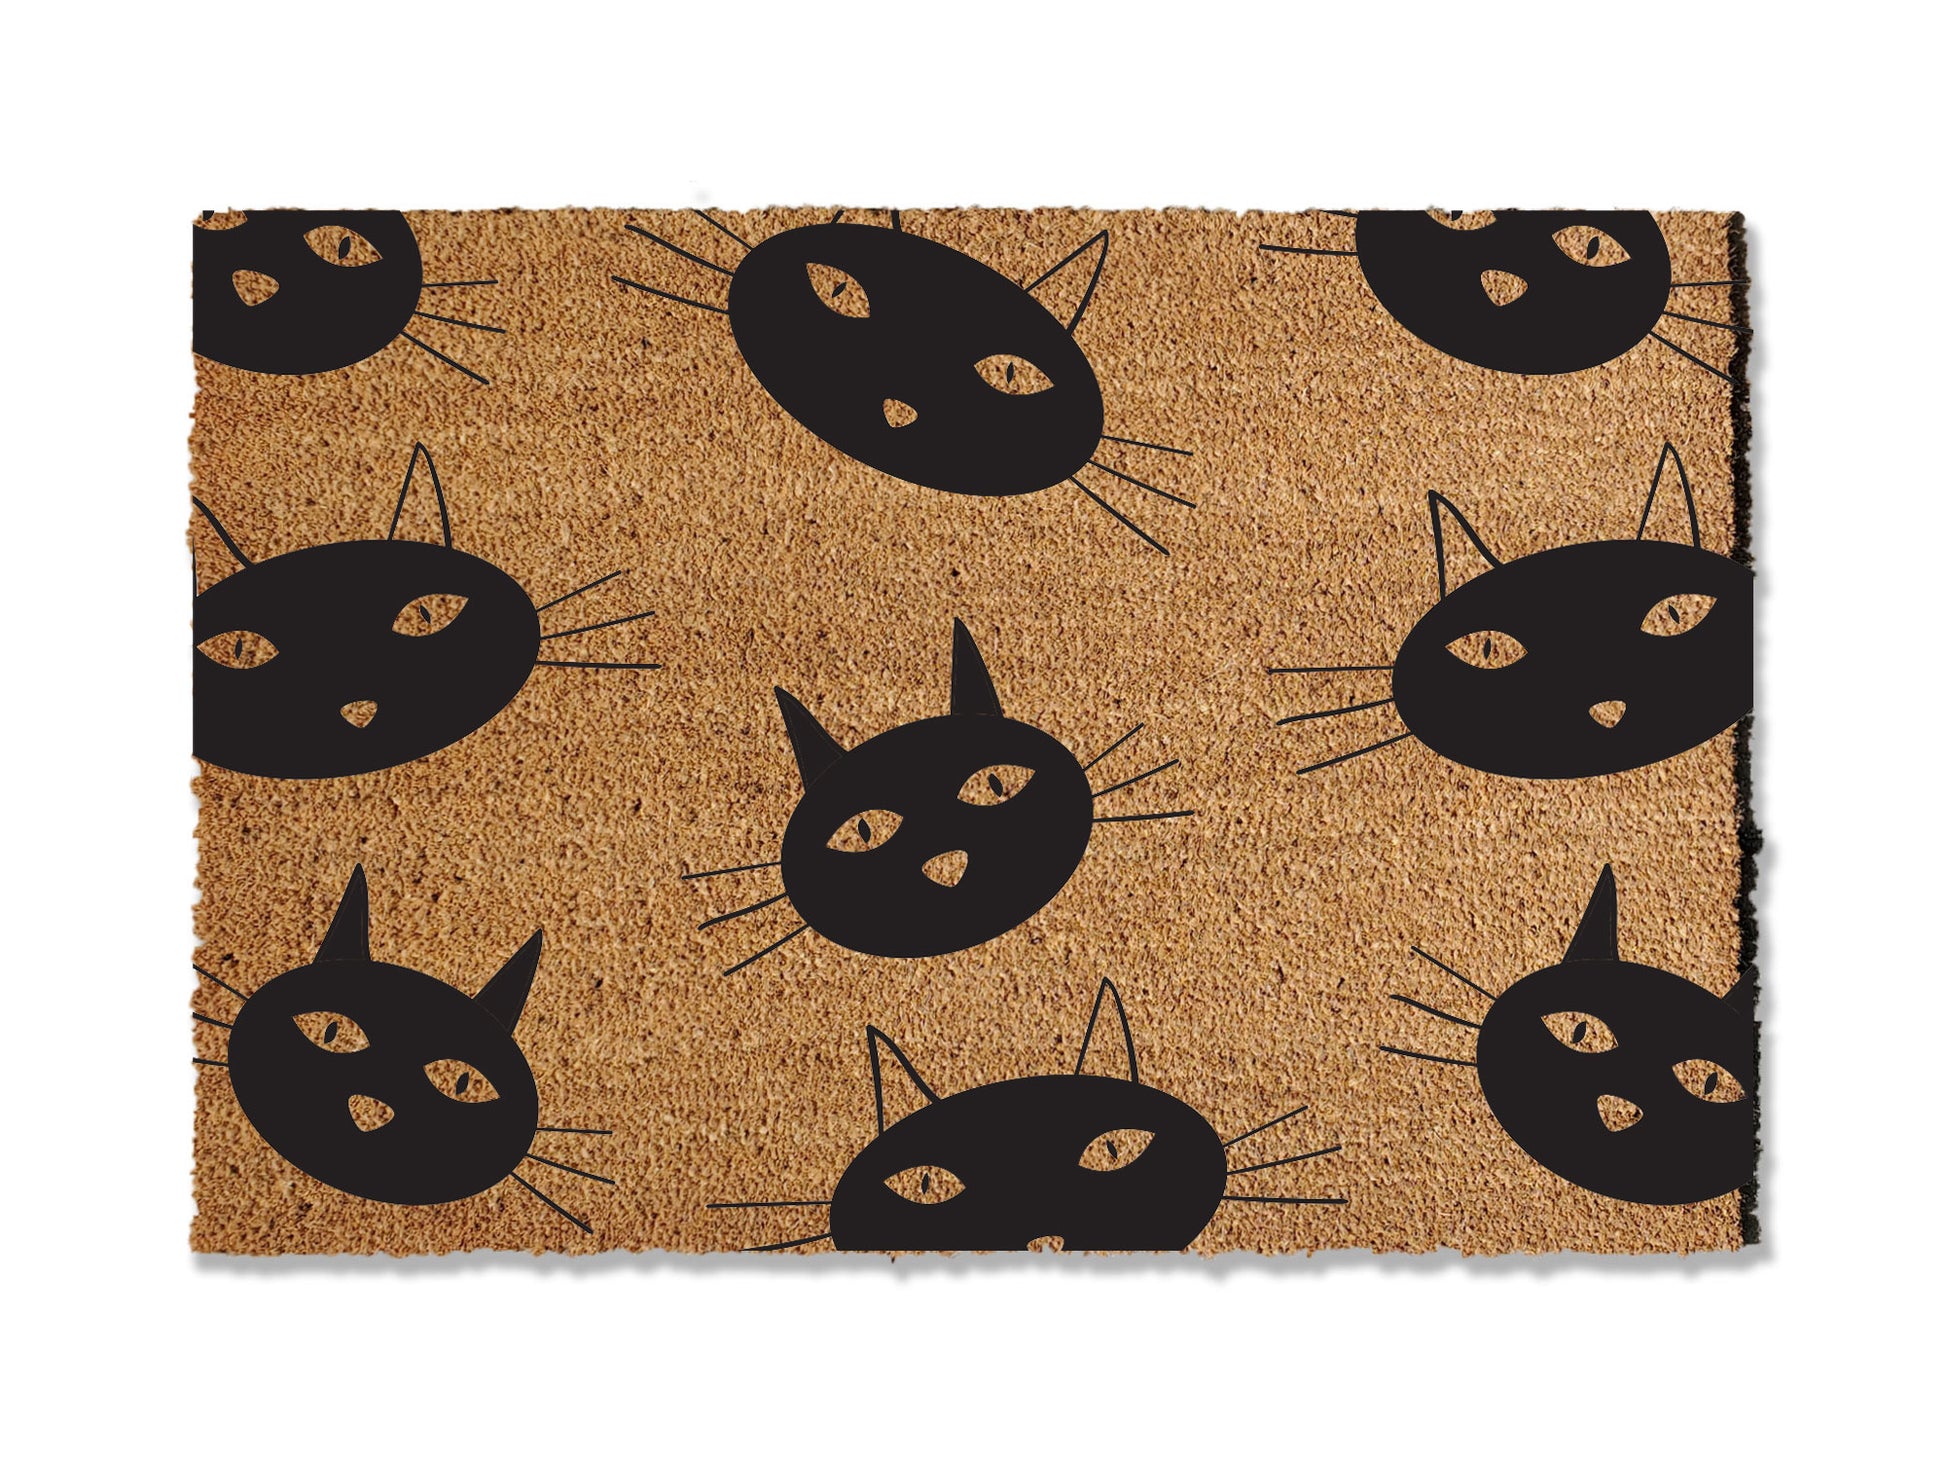 Custom 1/2 inch thick coir doormat featuring a charming cat face pattern. Elevate your entryway with this personalized mat that not only adds a touch of feline charm but is also highly effective at trapping dirt, ensuring a clean and inviting home.